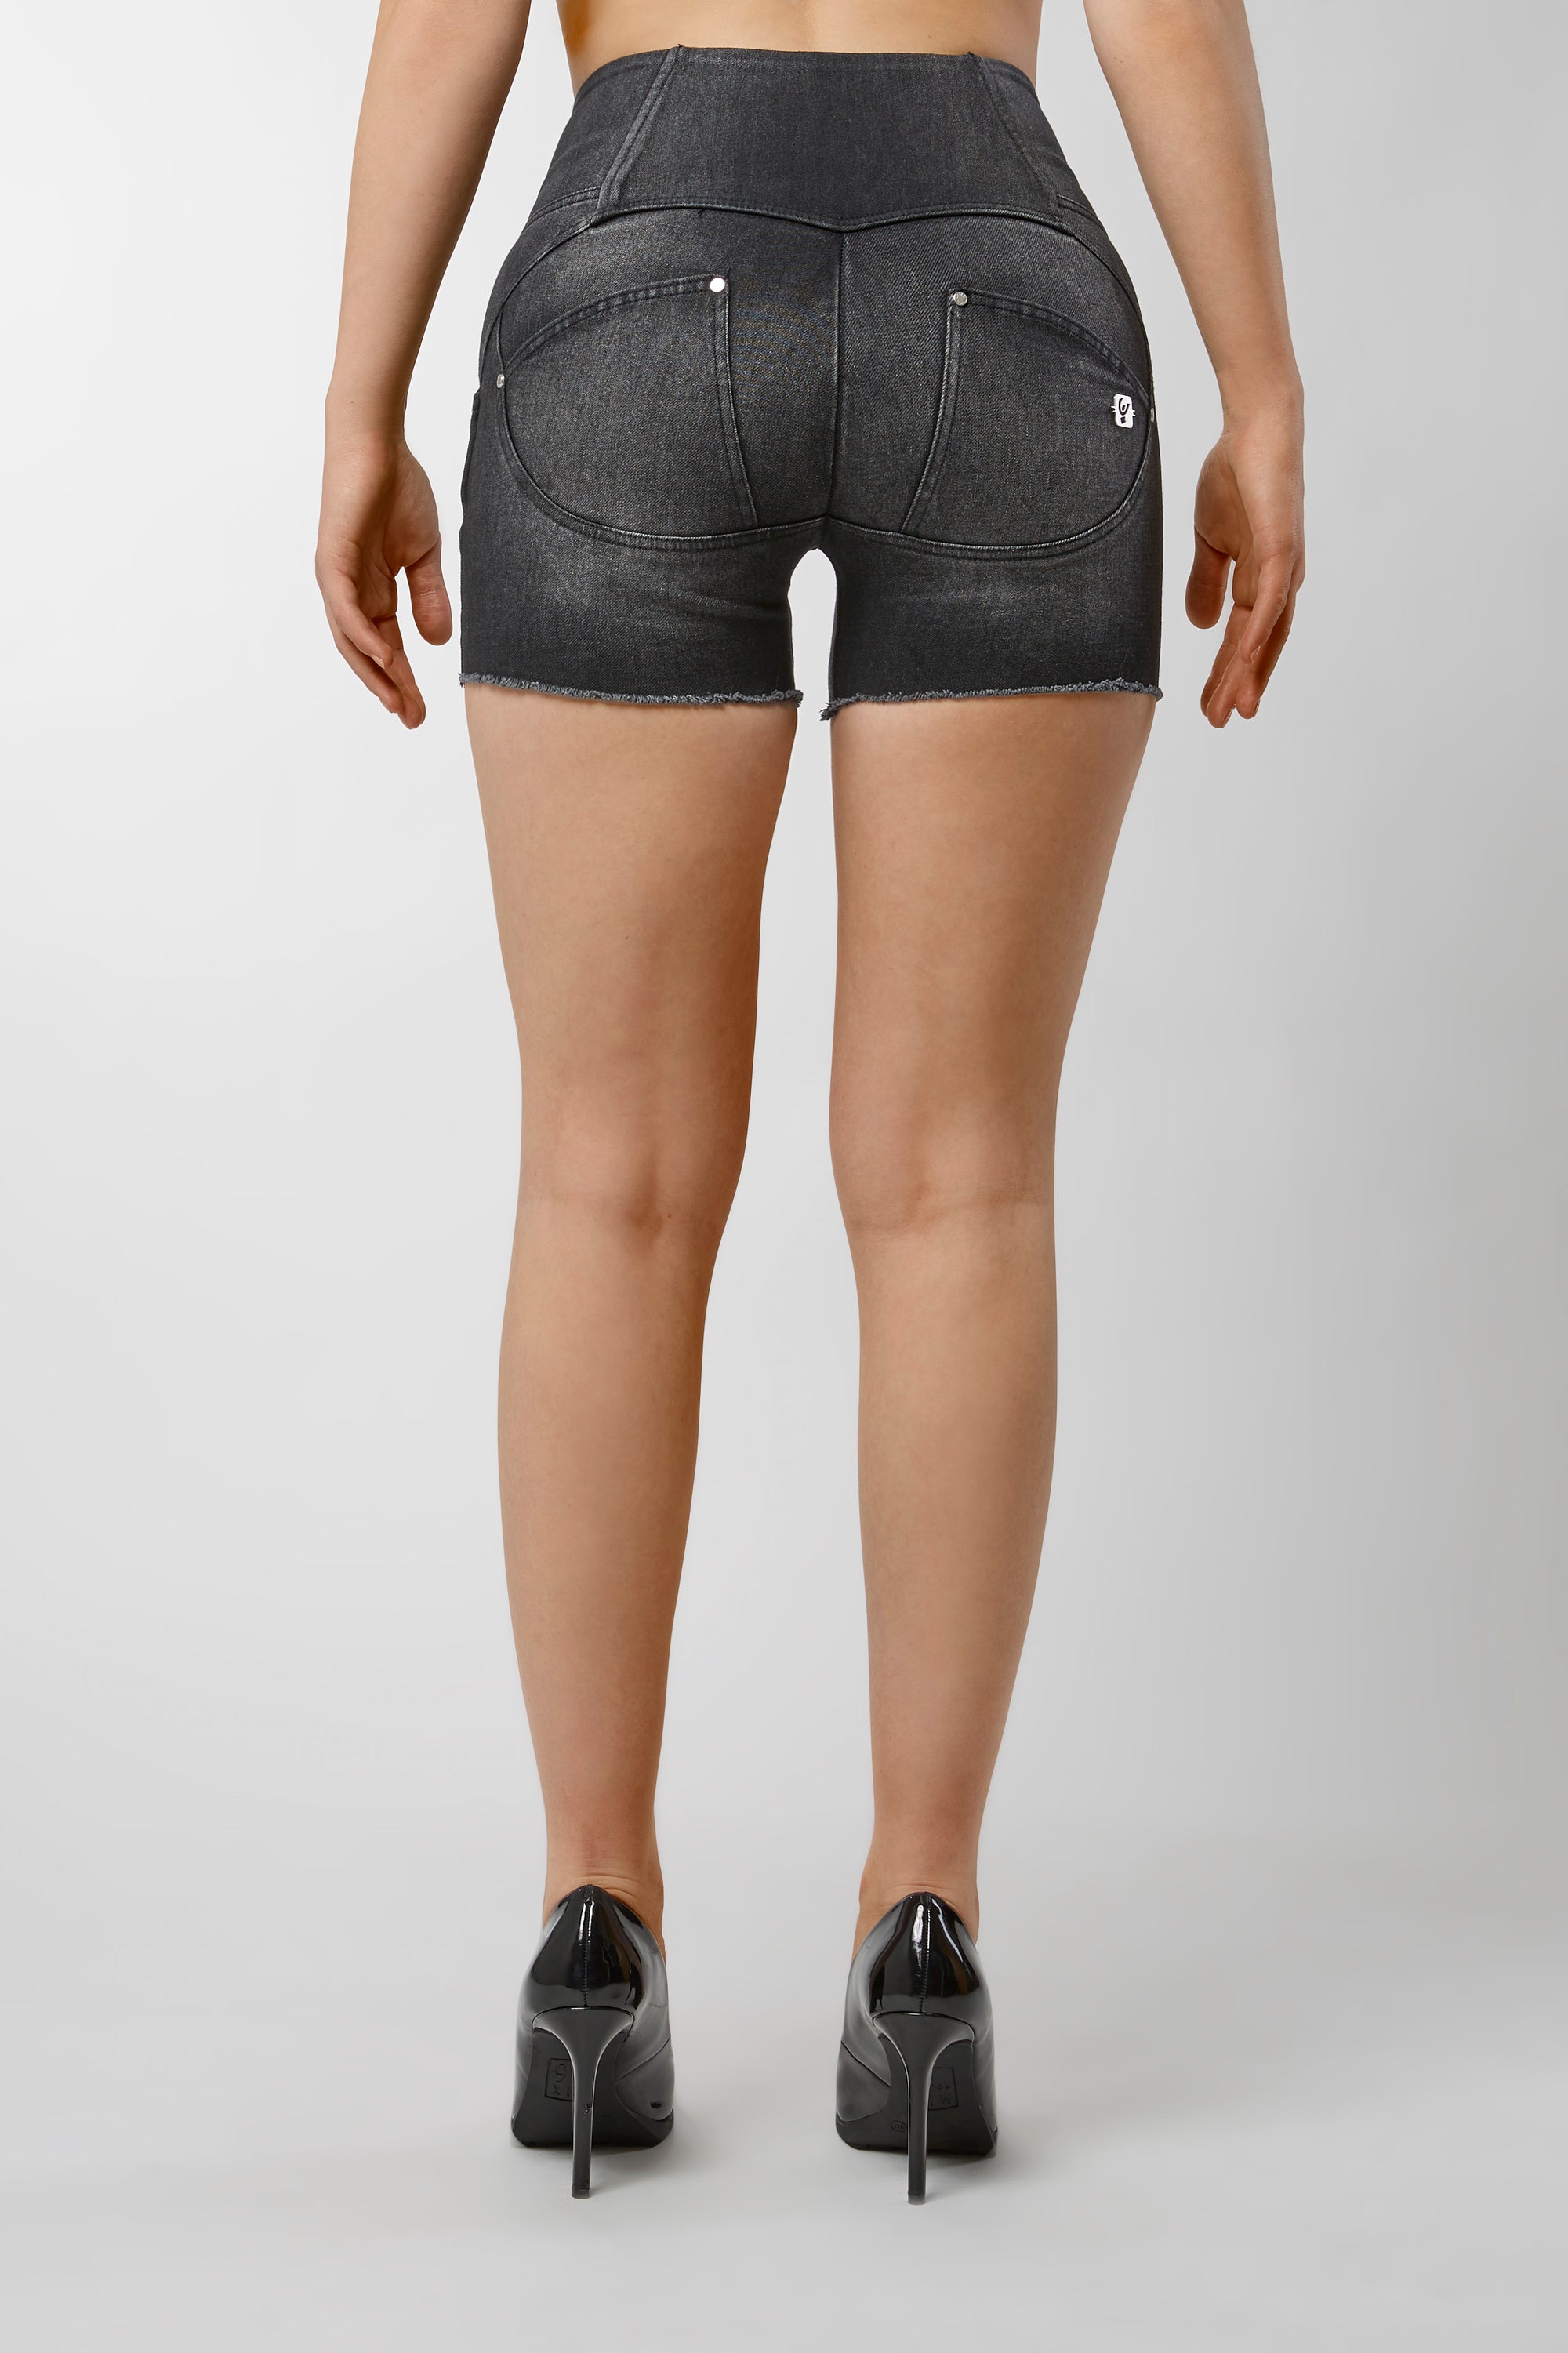 jean shorts with leggings and boots - OFF-58% >Free Delivery